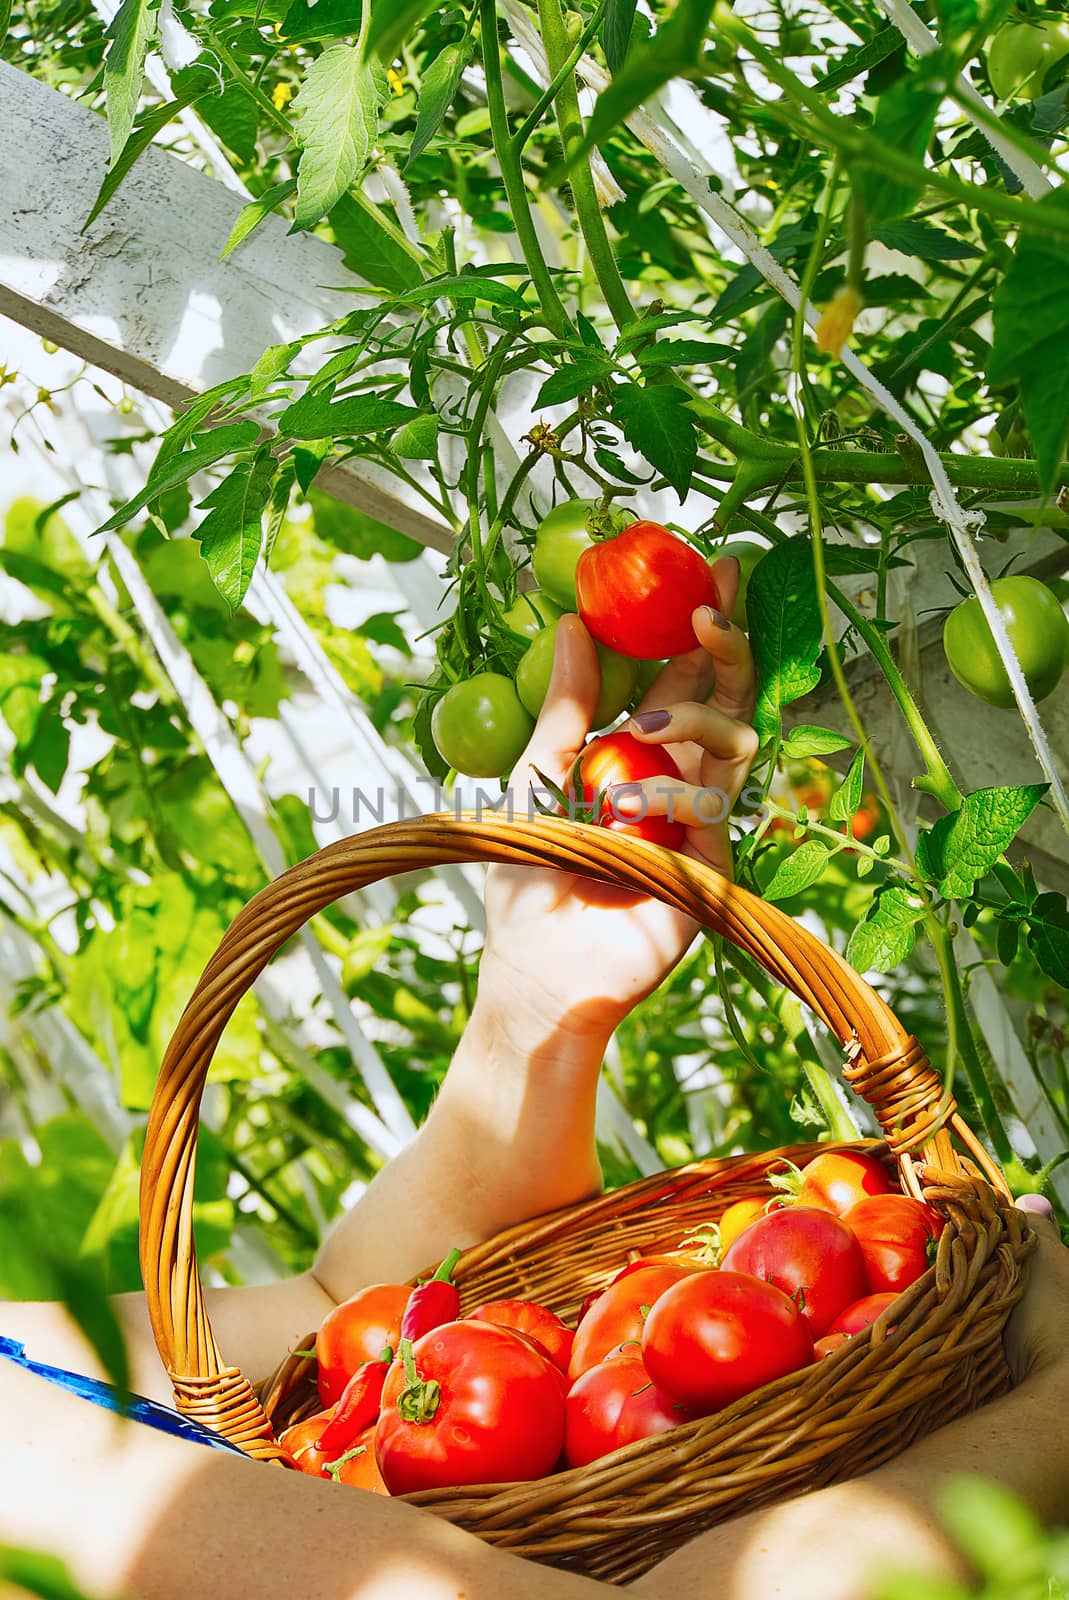 in the greenhouse the woman hand collects ripe red ecological tomatoes into a wicker basket. eco food home gardening concept. by PhotoTime